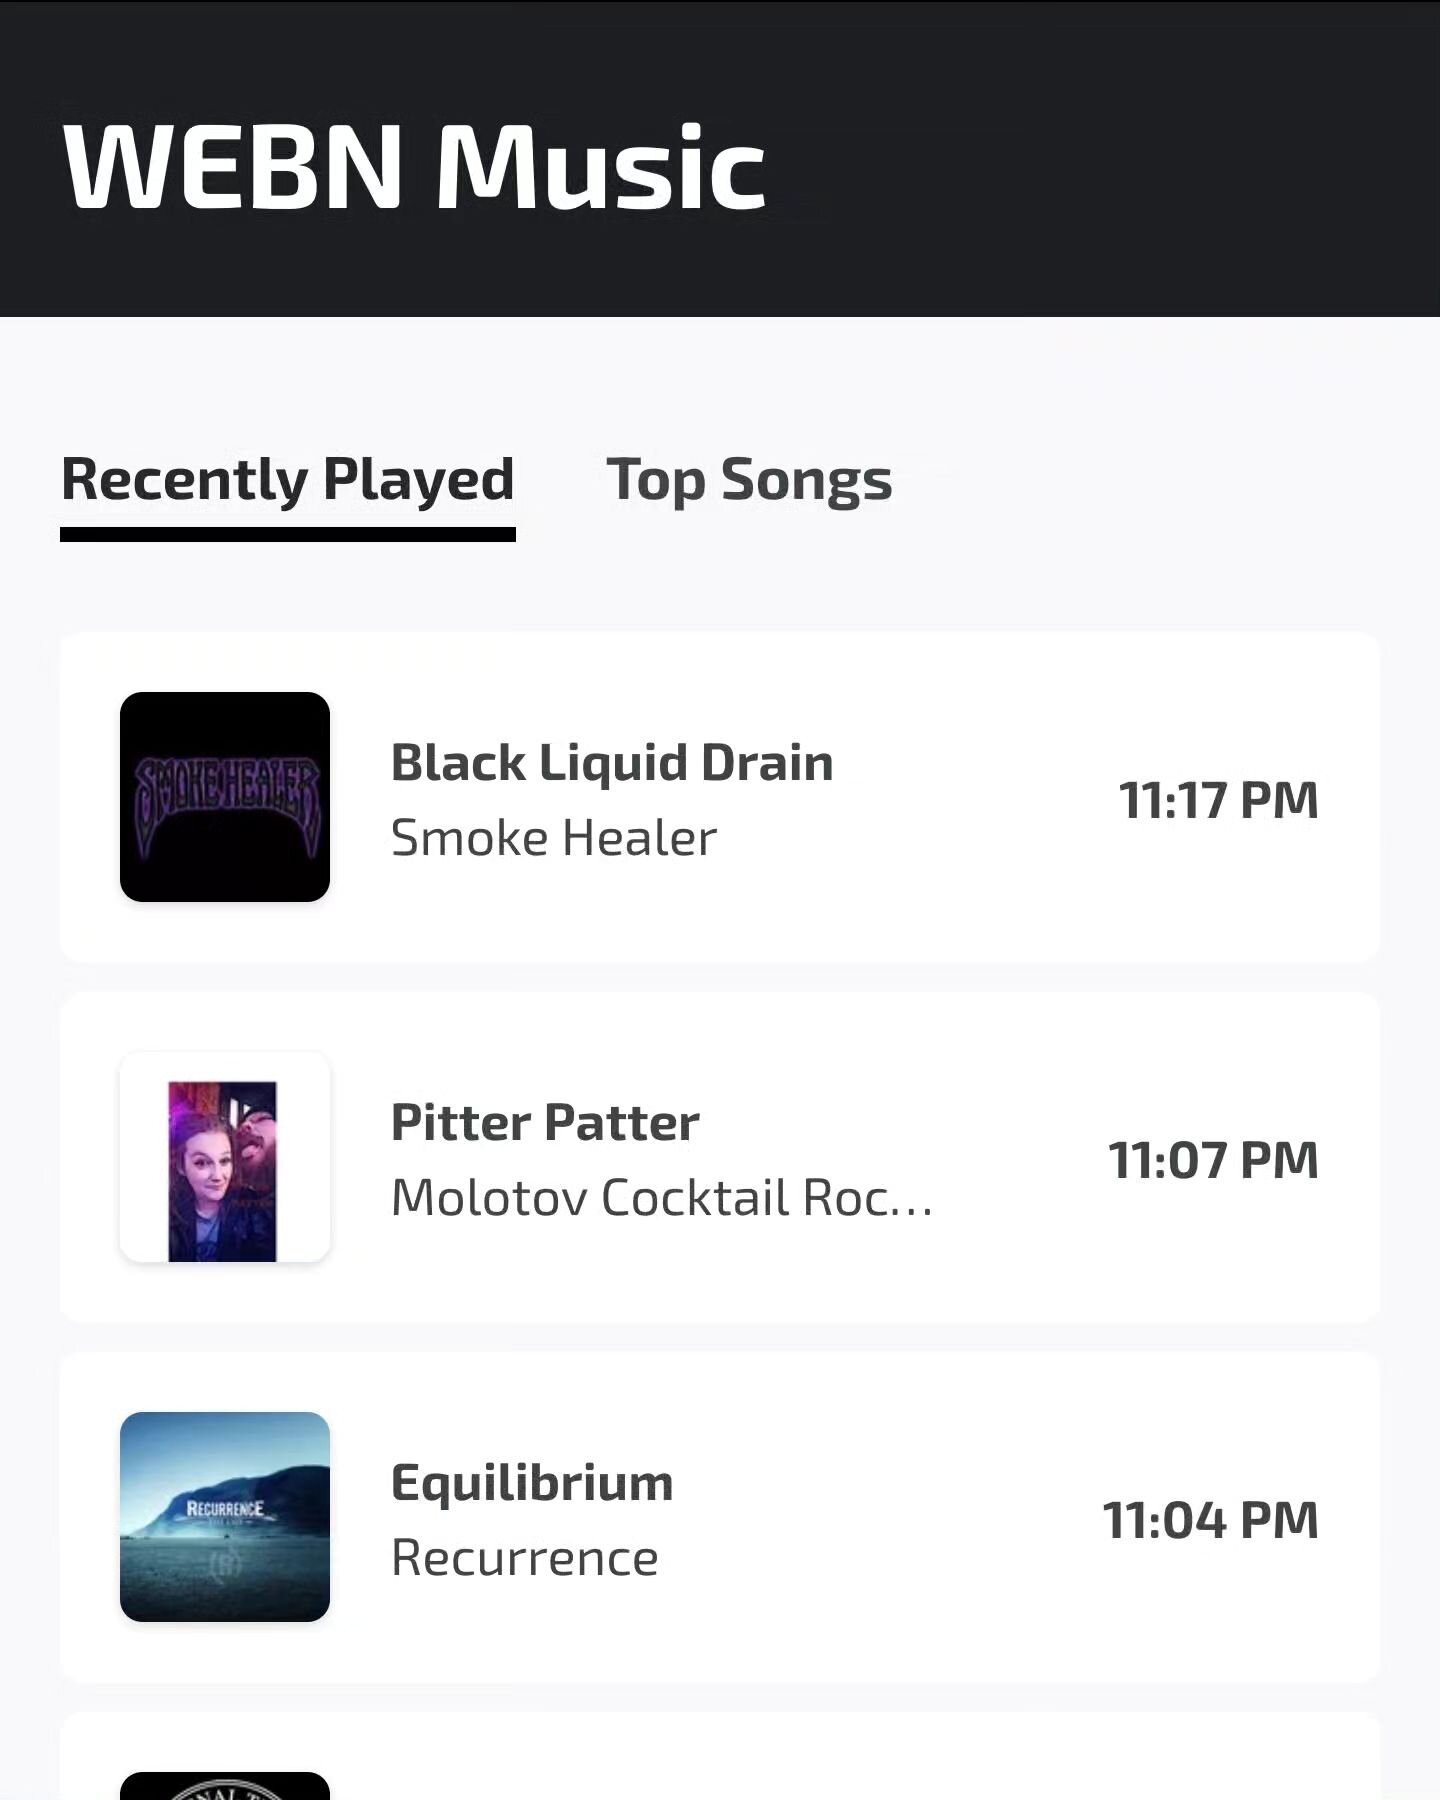 Hey we just had our song &quot;Equilibrium&quot; played tonight on @webn Cincinnati, OH rock and metal FM radio! Did any of you hear us on there?! 🤘
🔄
#metal #heavymetal #metalhead #deathmetal #guitar #metalmusic #metalcore #metalband #metalheads #